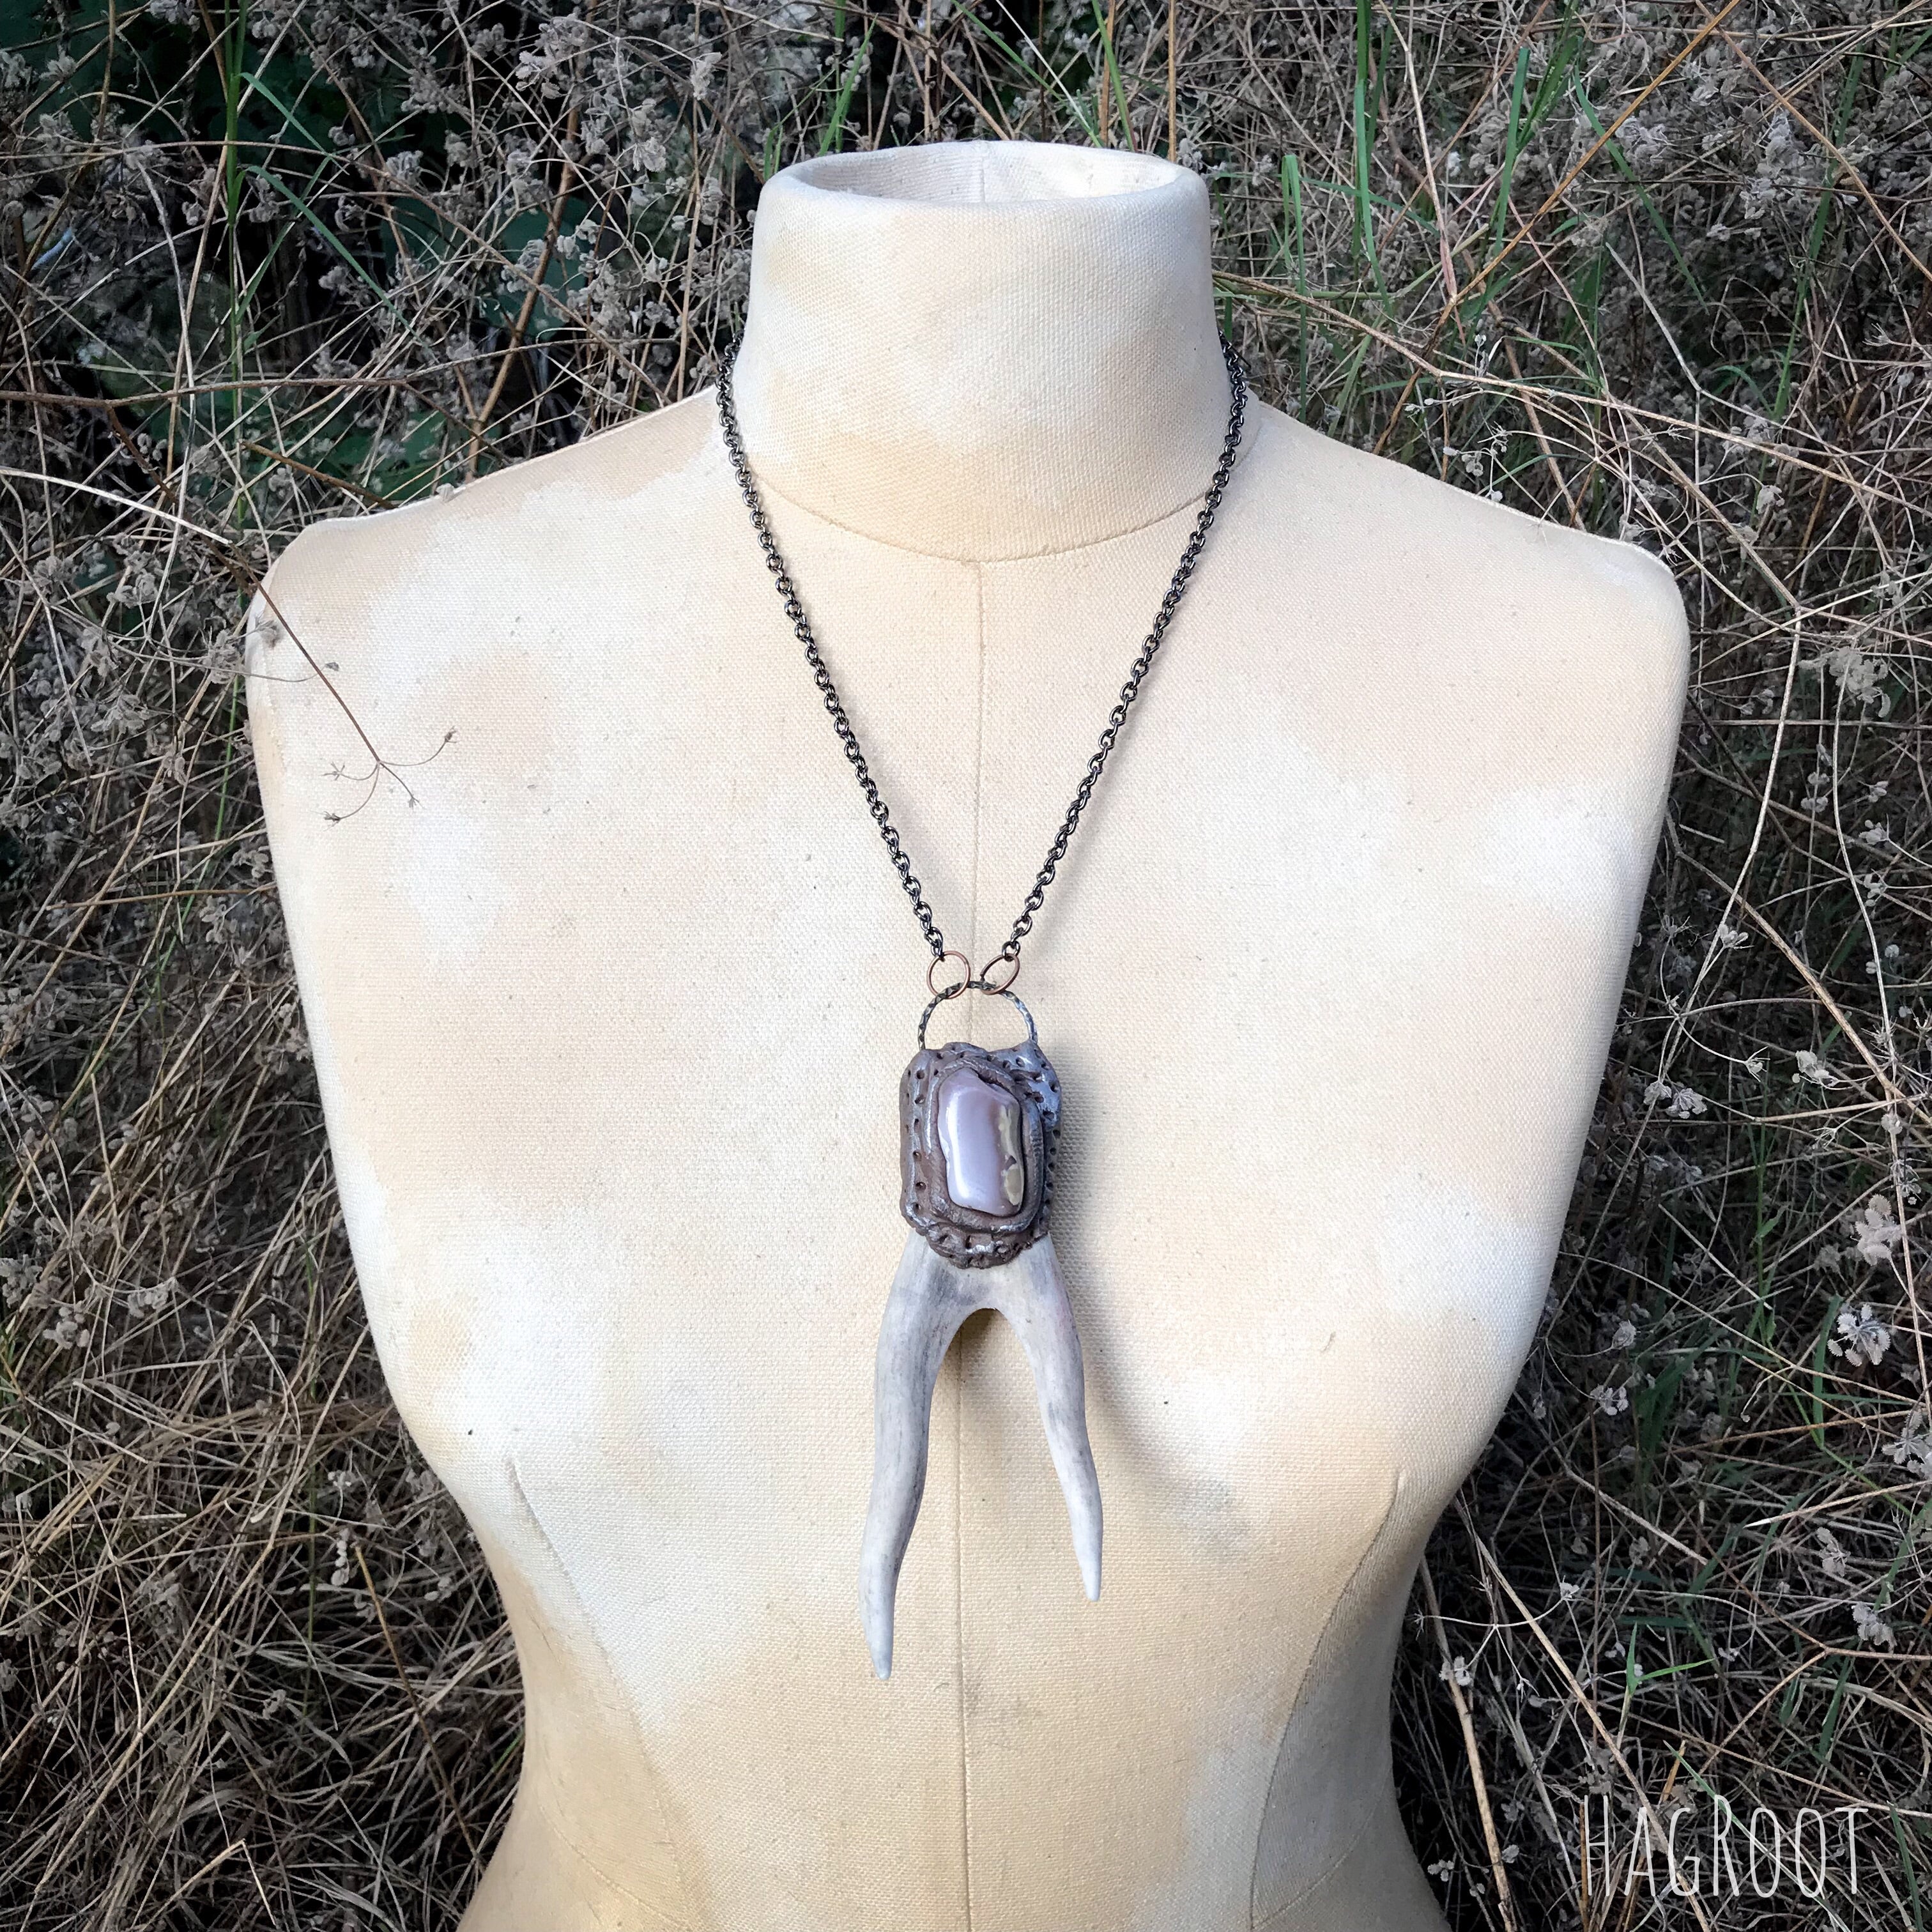 Necklace for Wild Creativity and Entering into the Unknown